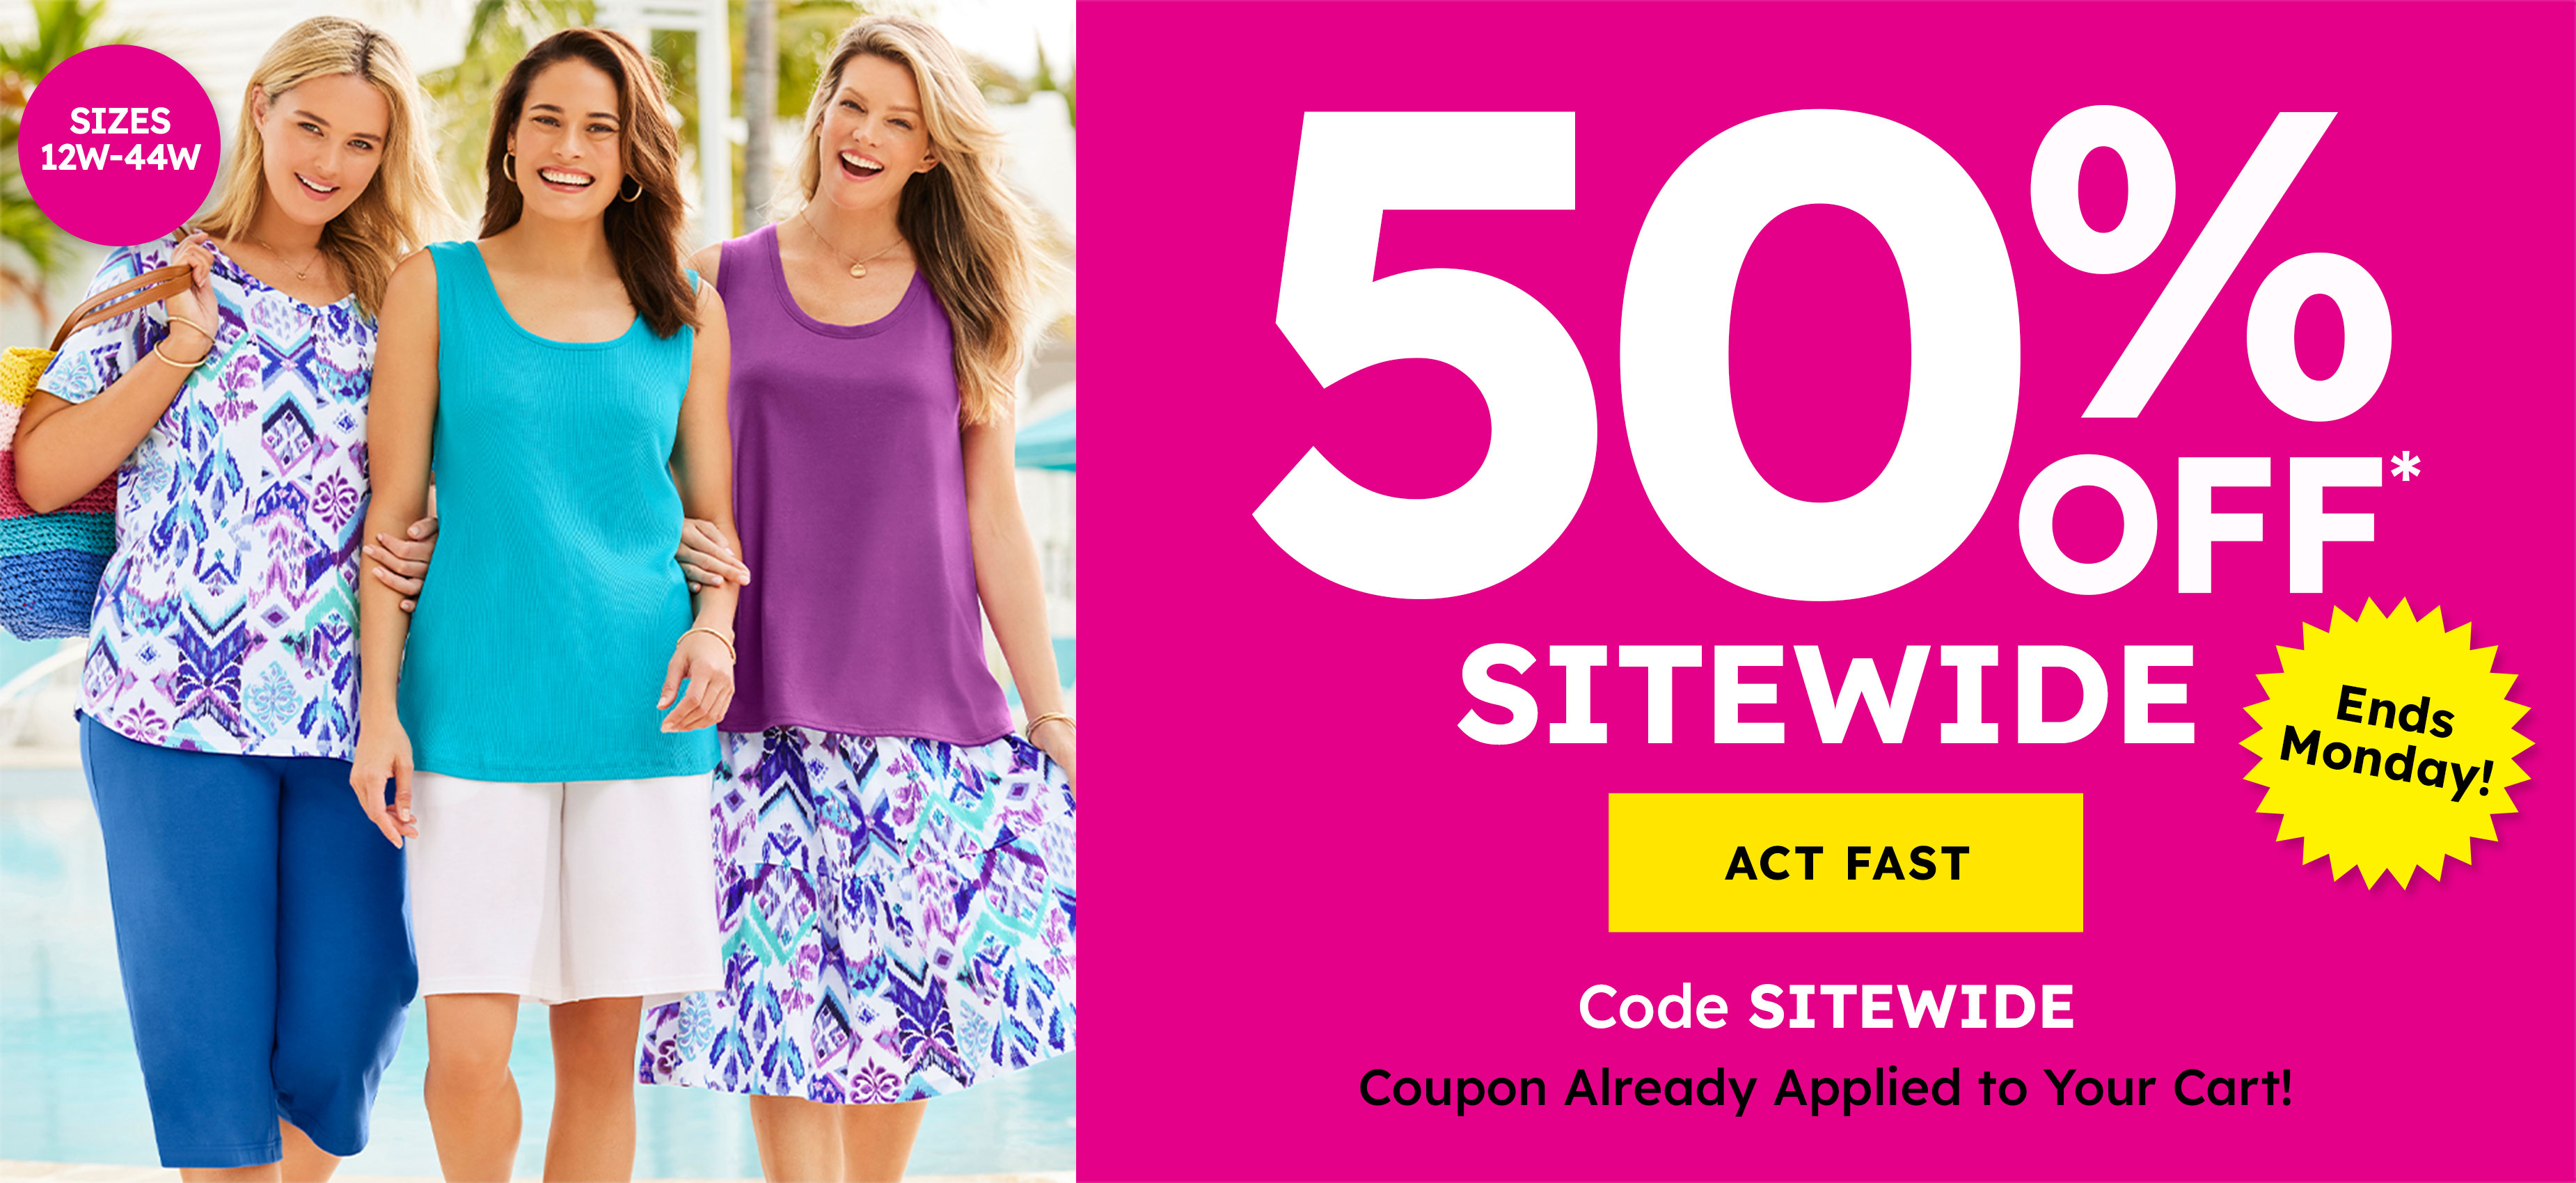 50% off sitewide, ends monday! act fast